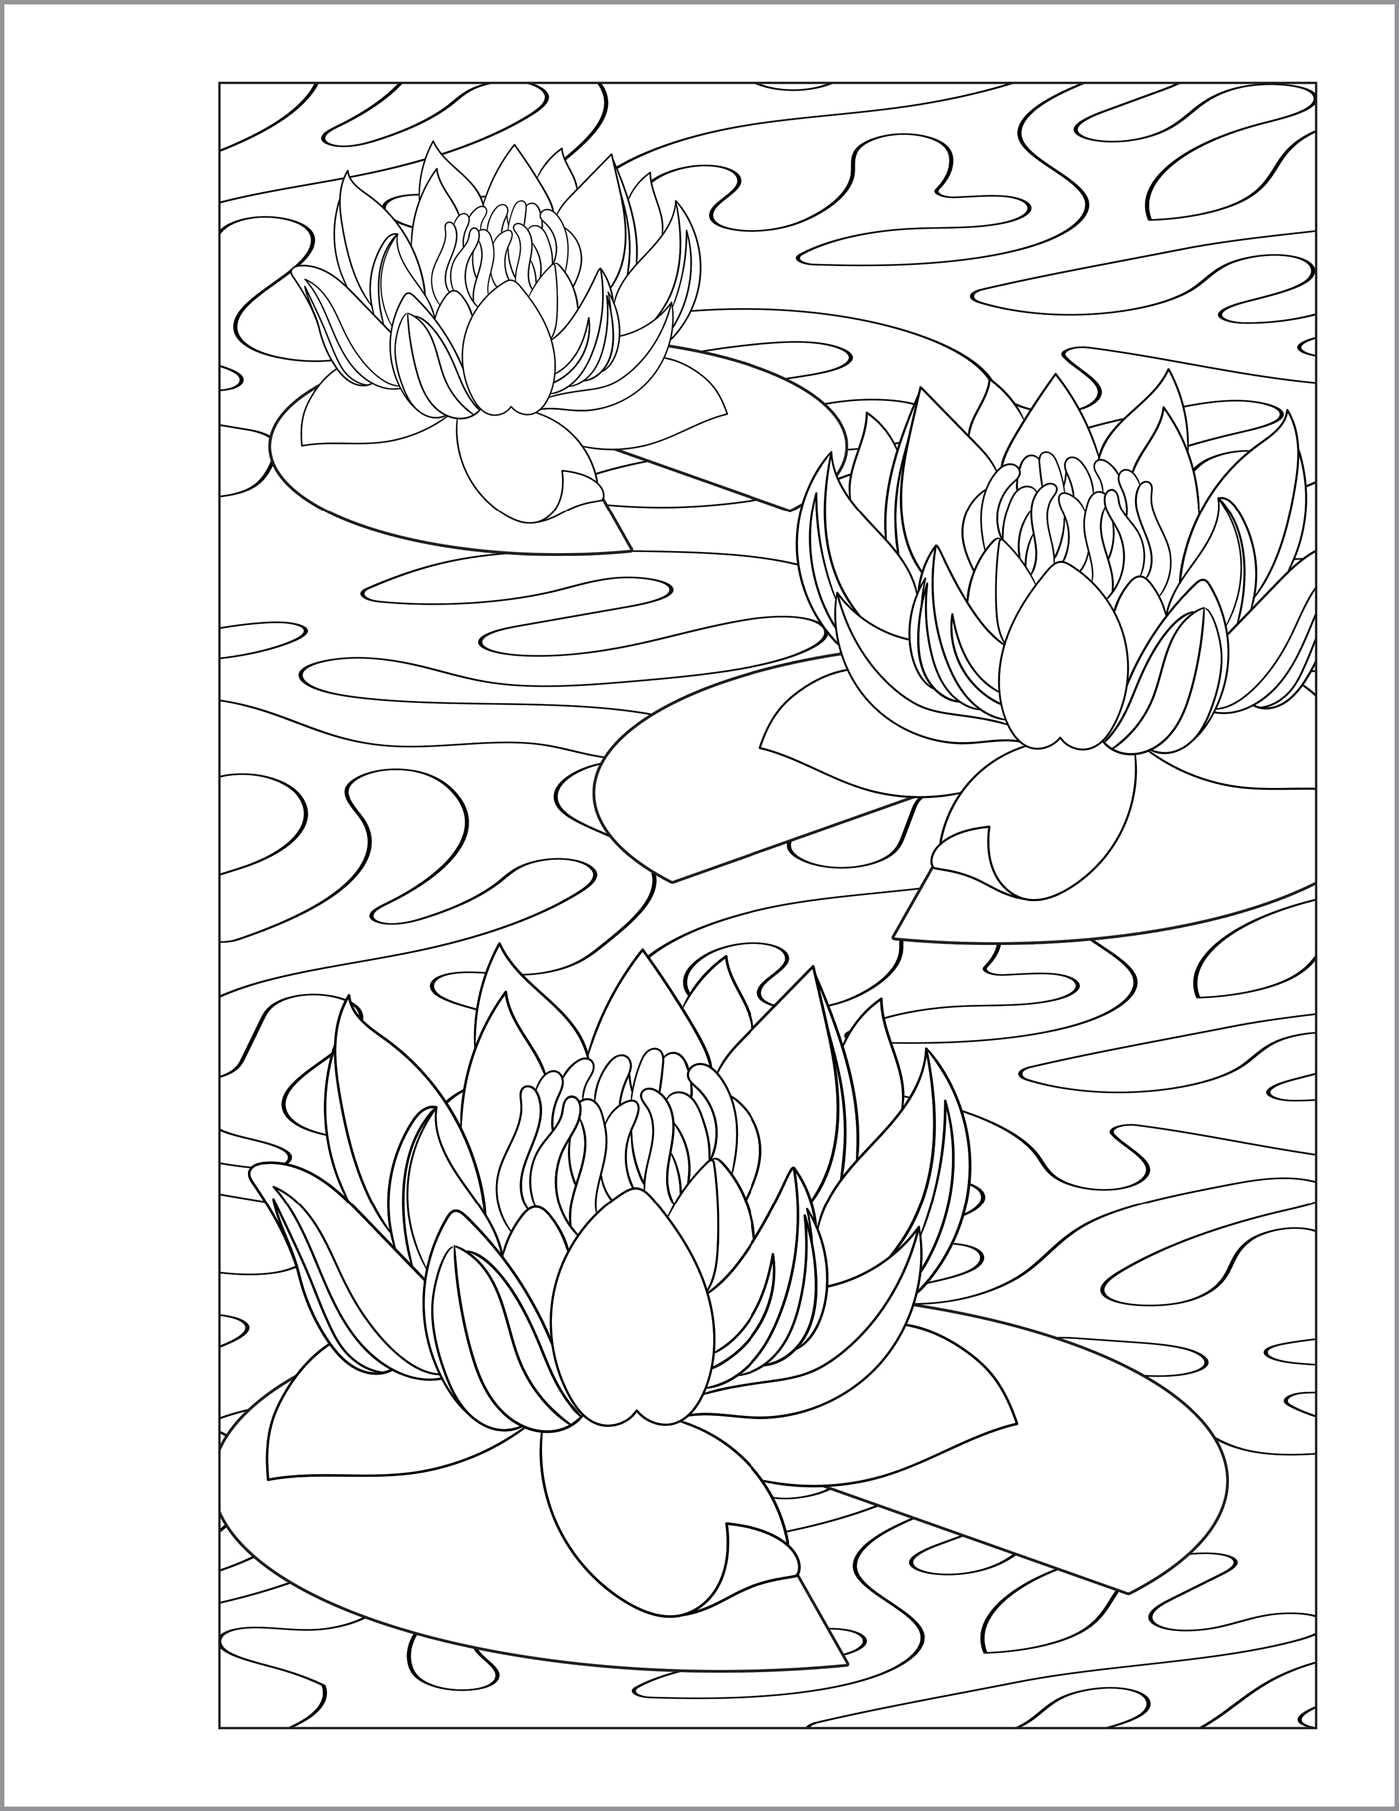 Anxiety Relief Coloring Book for Teens: Creativity to Find Calm